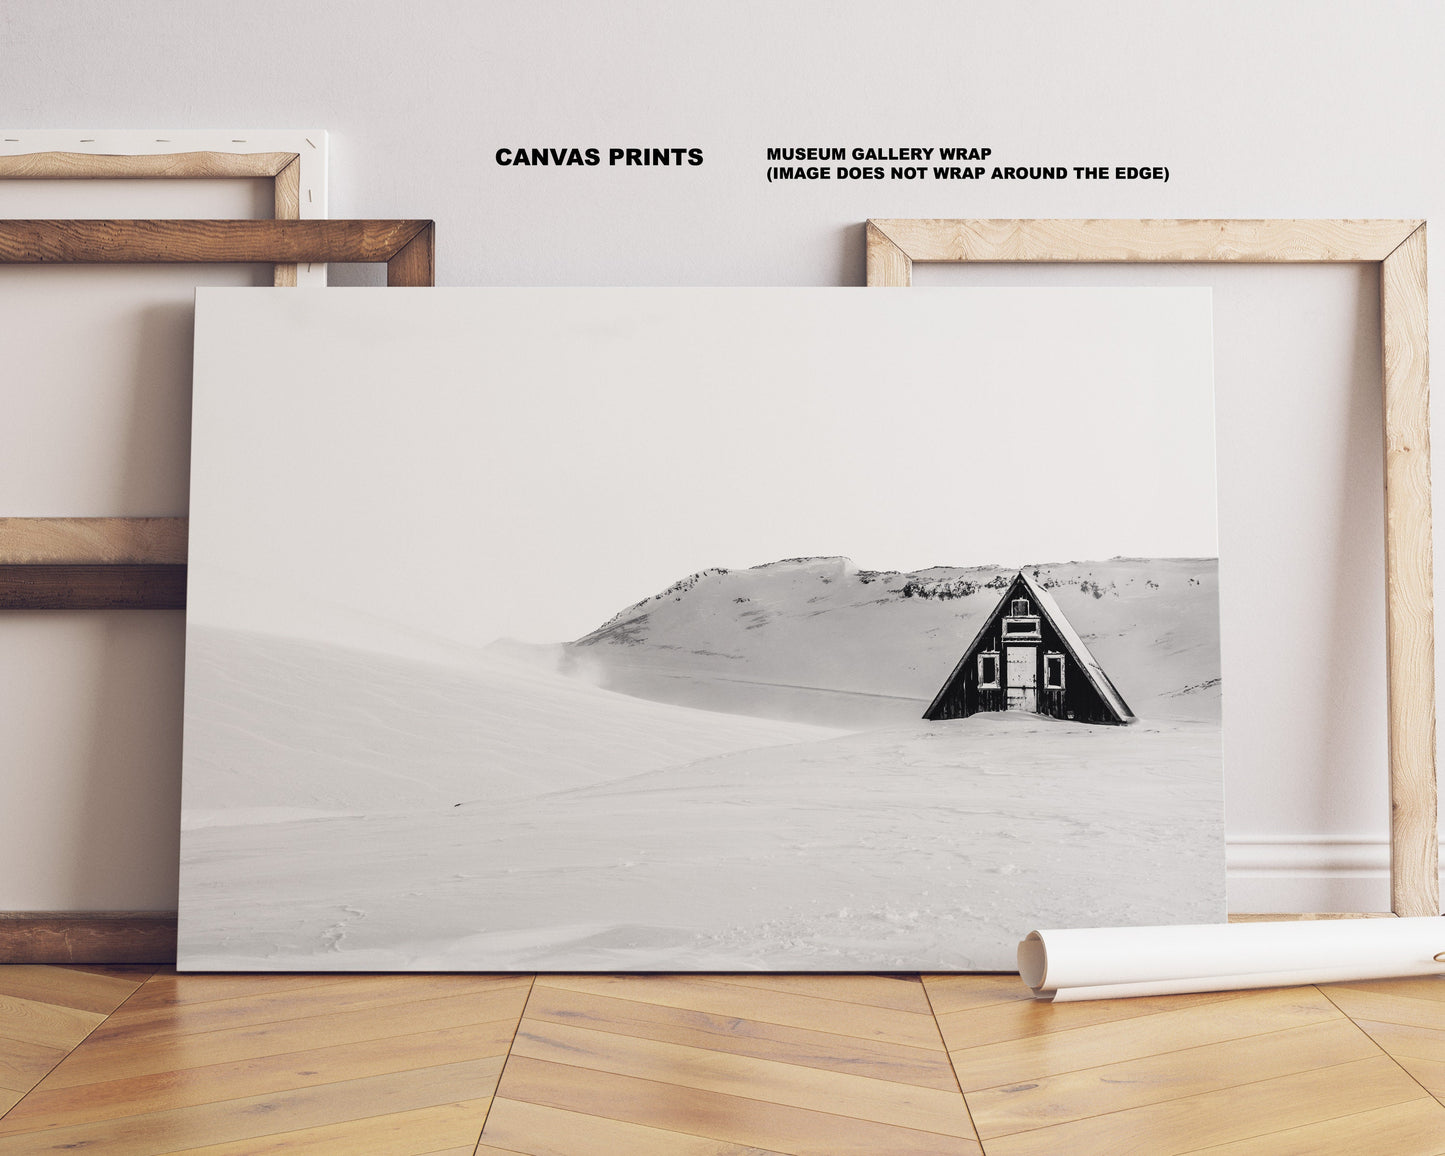 Iceland Print - Iceland Photography Print - Iceland Wall Art - Iceland Poster - Black and White Photography - Landscape - Cabin - House